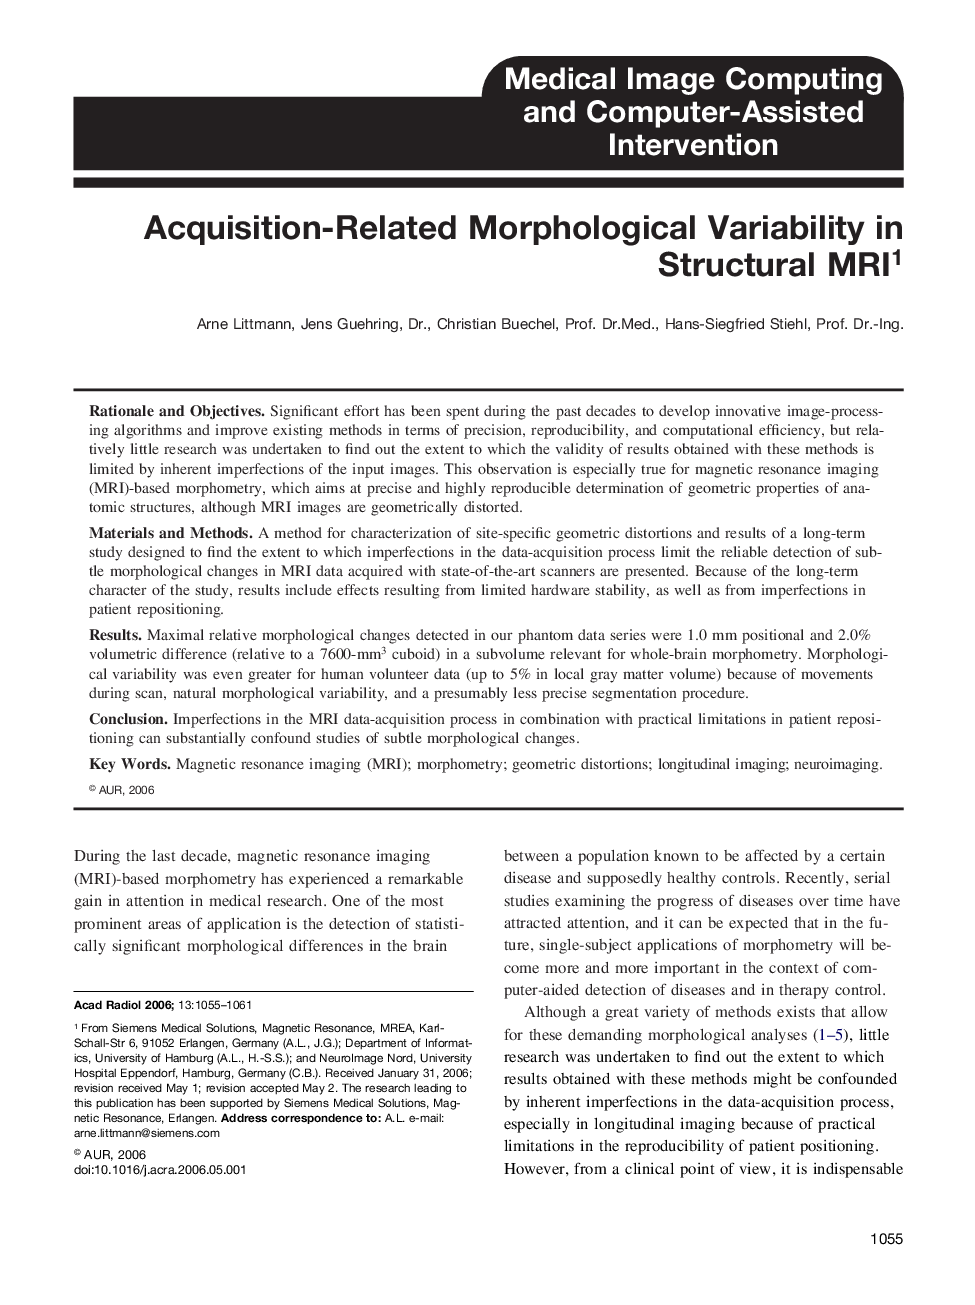 Acquisition-Related Morphological Variability in Structural MRI